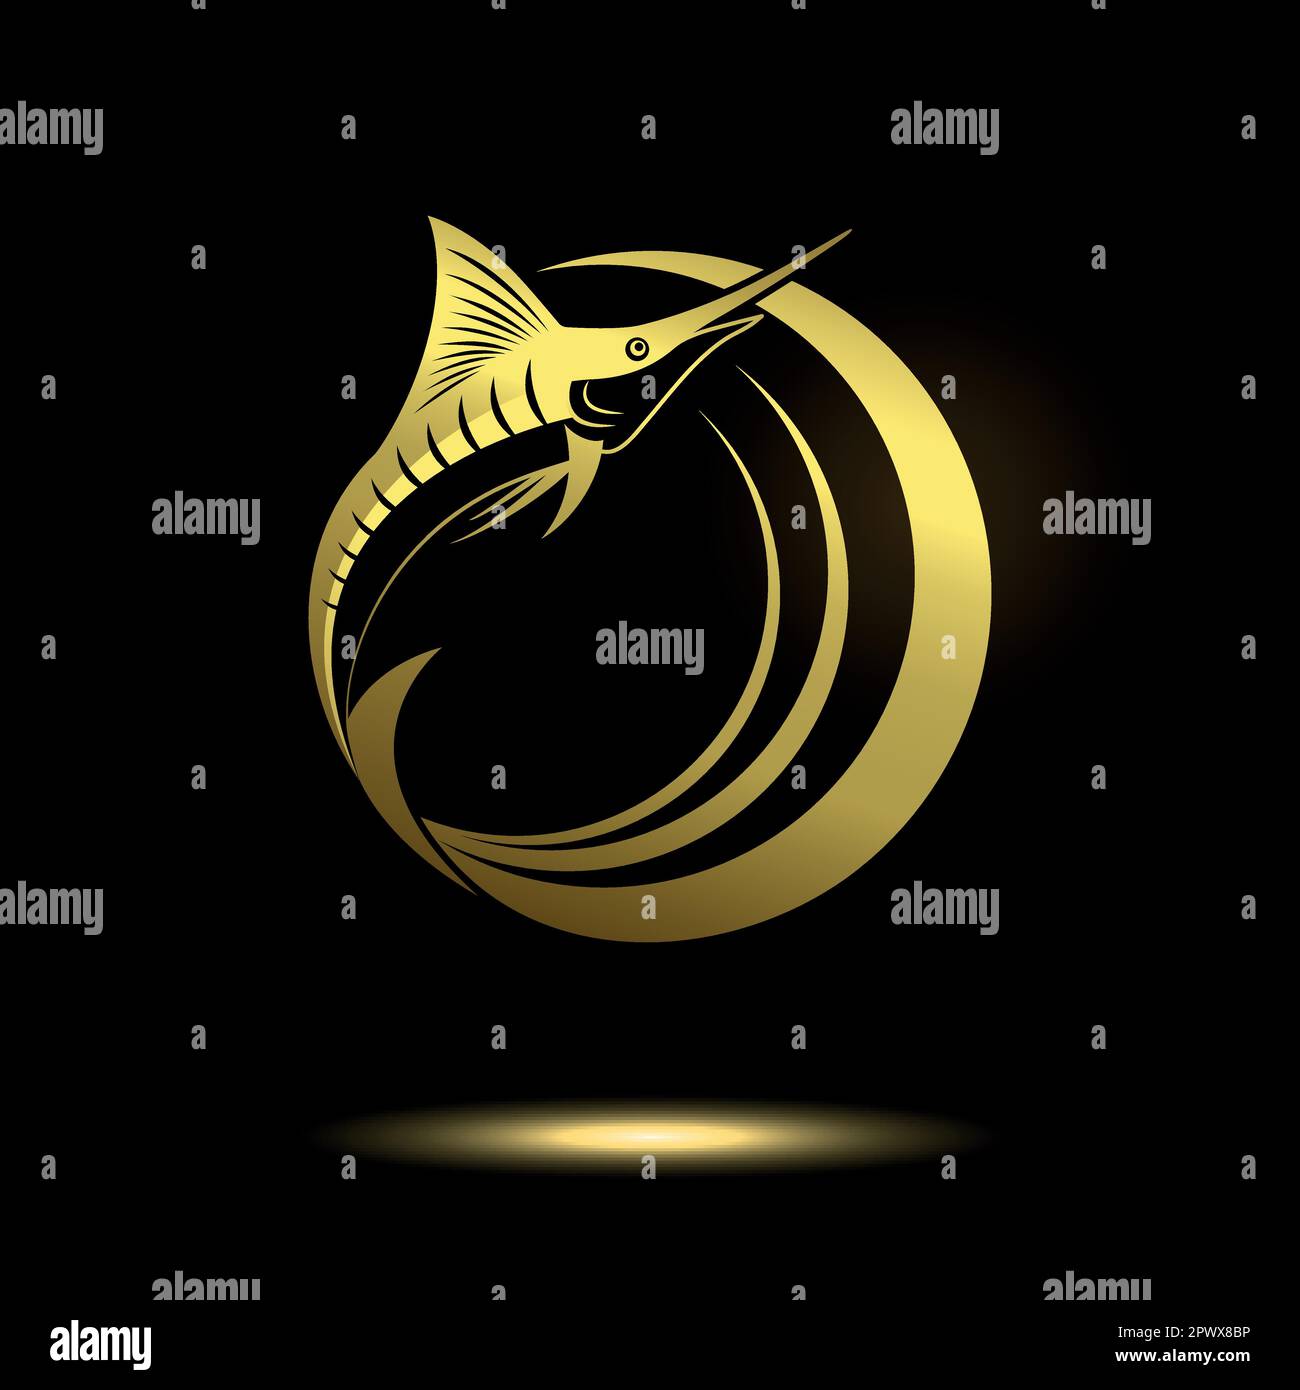 icon marlin fish in gold color on a black background Stock Vector